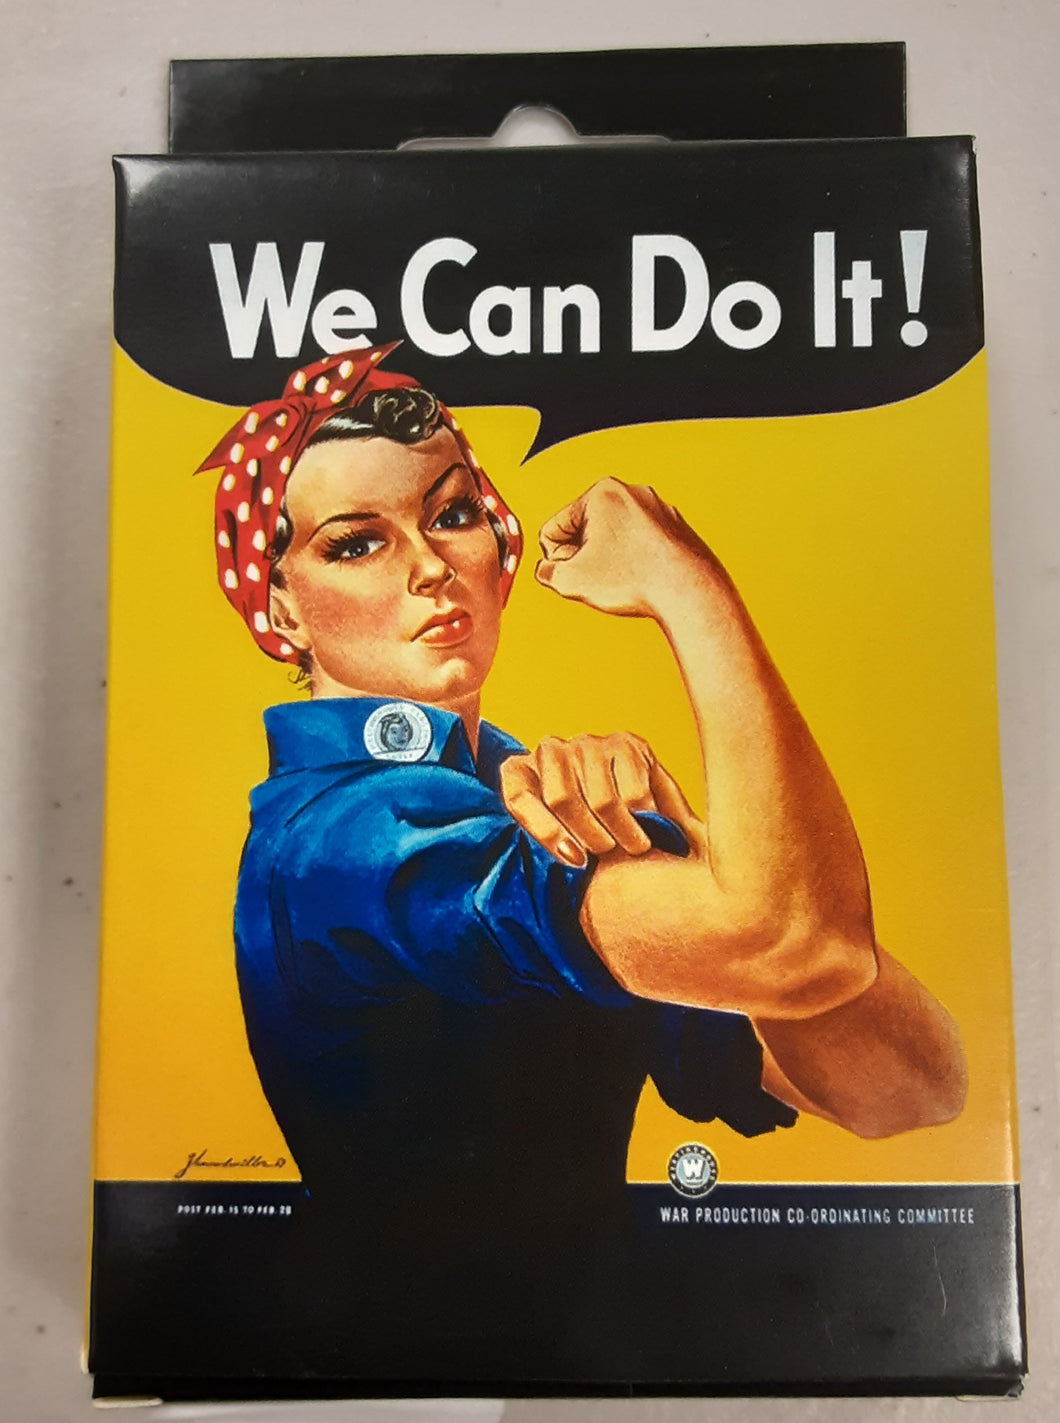 Rosie the Riveter Playing Cards